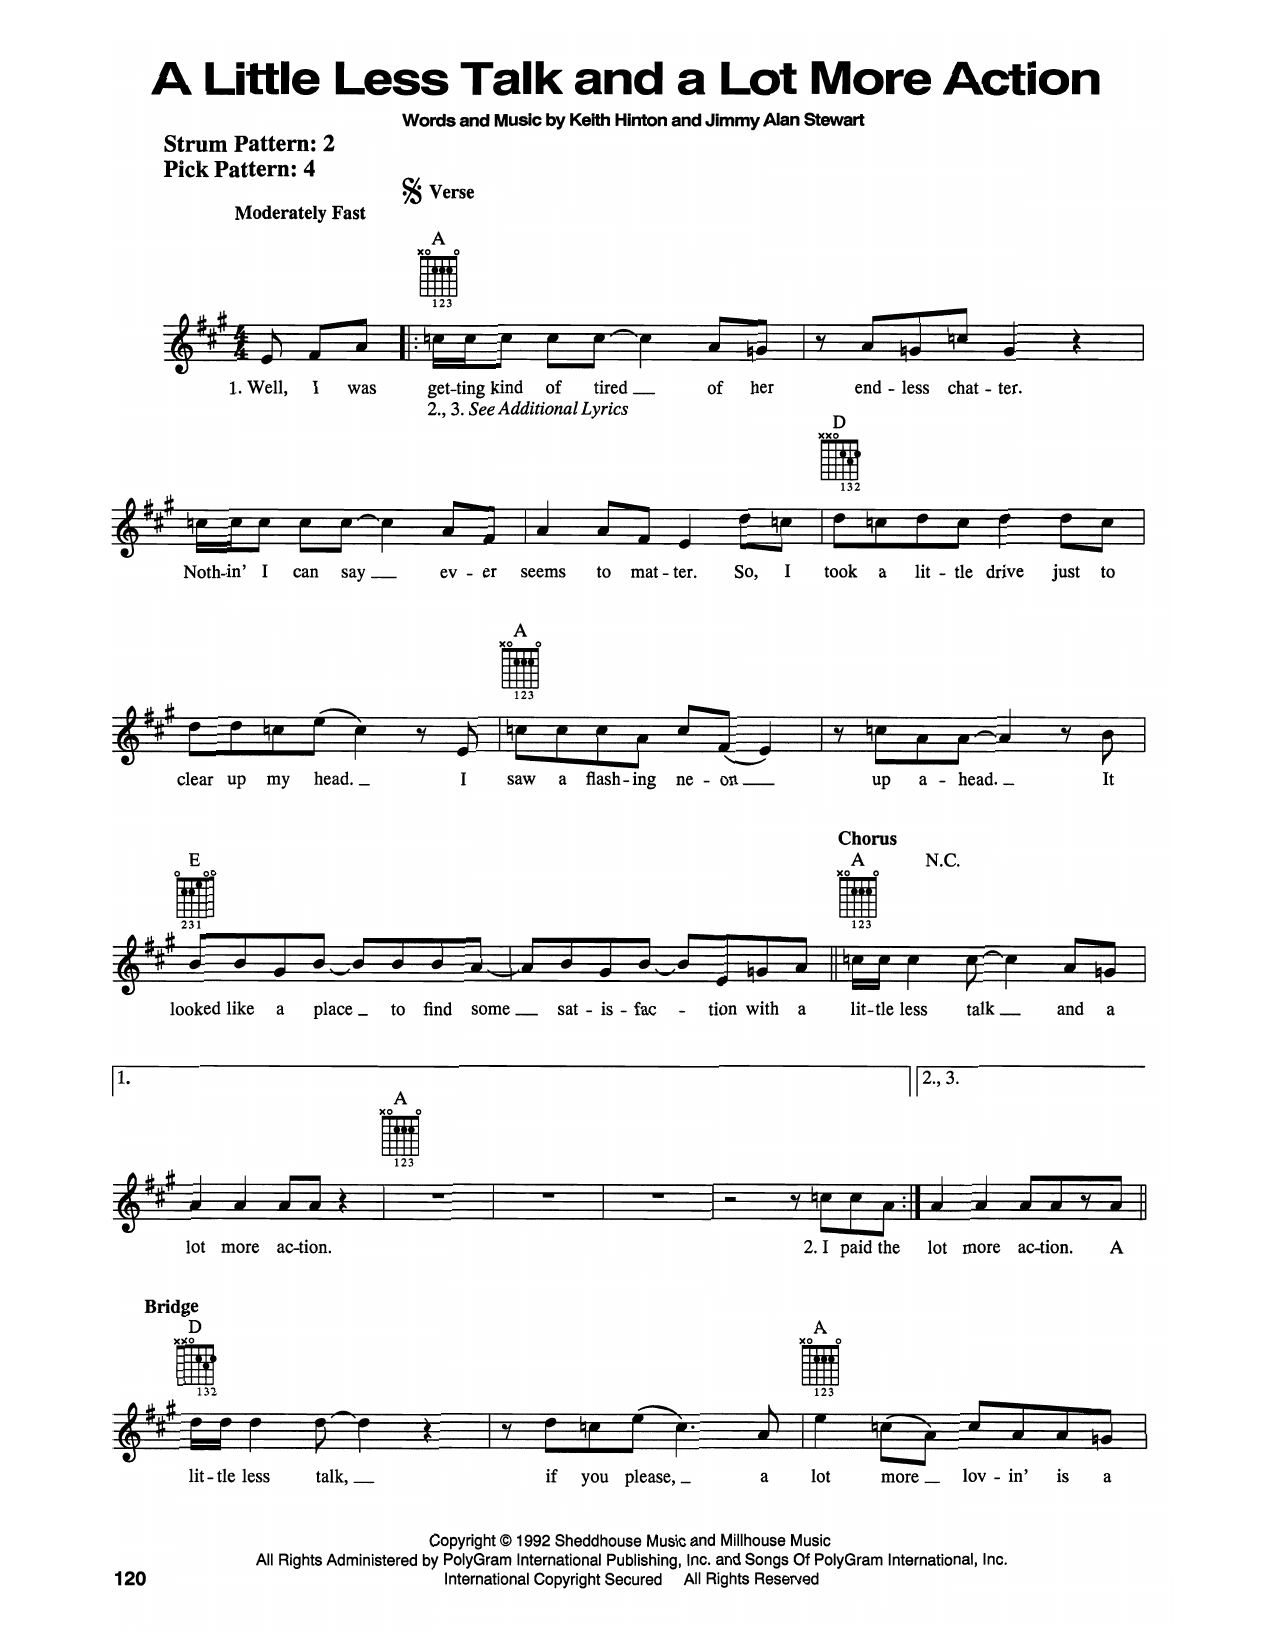 Toby Keith A Little Less Talk And A Lot More Action sheet music notes printable PDF score